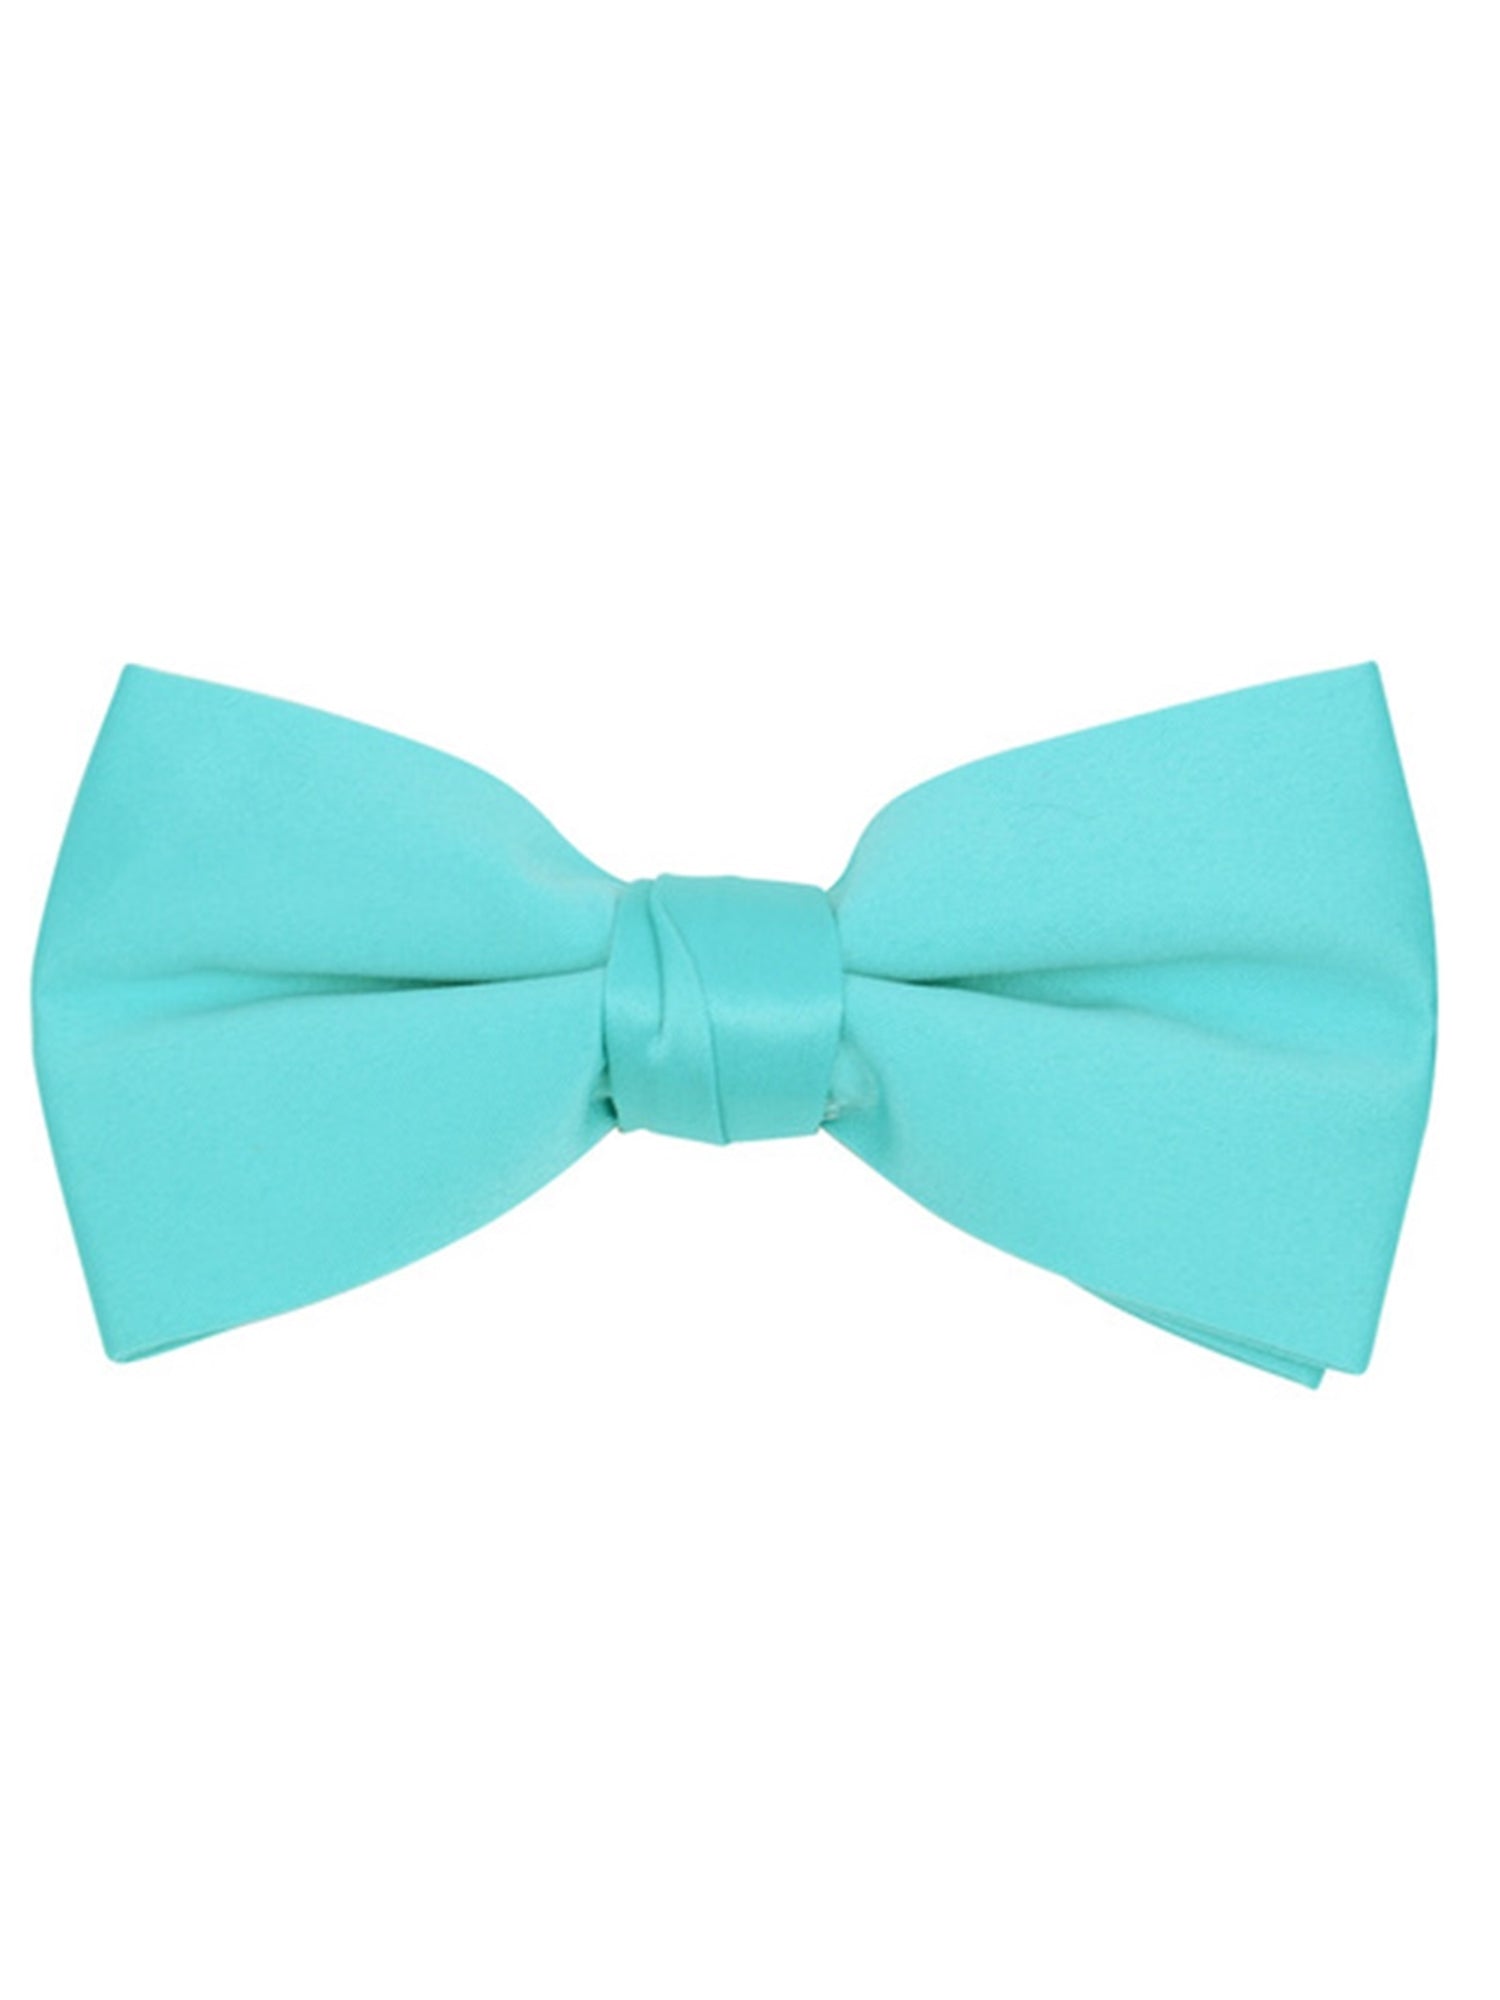 Men's Pre-tied Adjustable Length Bow Tie - Formal Tuxedo Solid Color Men's Solid Color Bow Tie TheDapperTie Turquoise One Size 